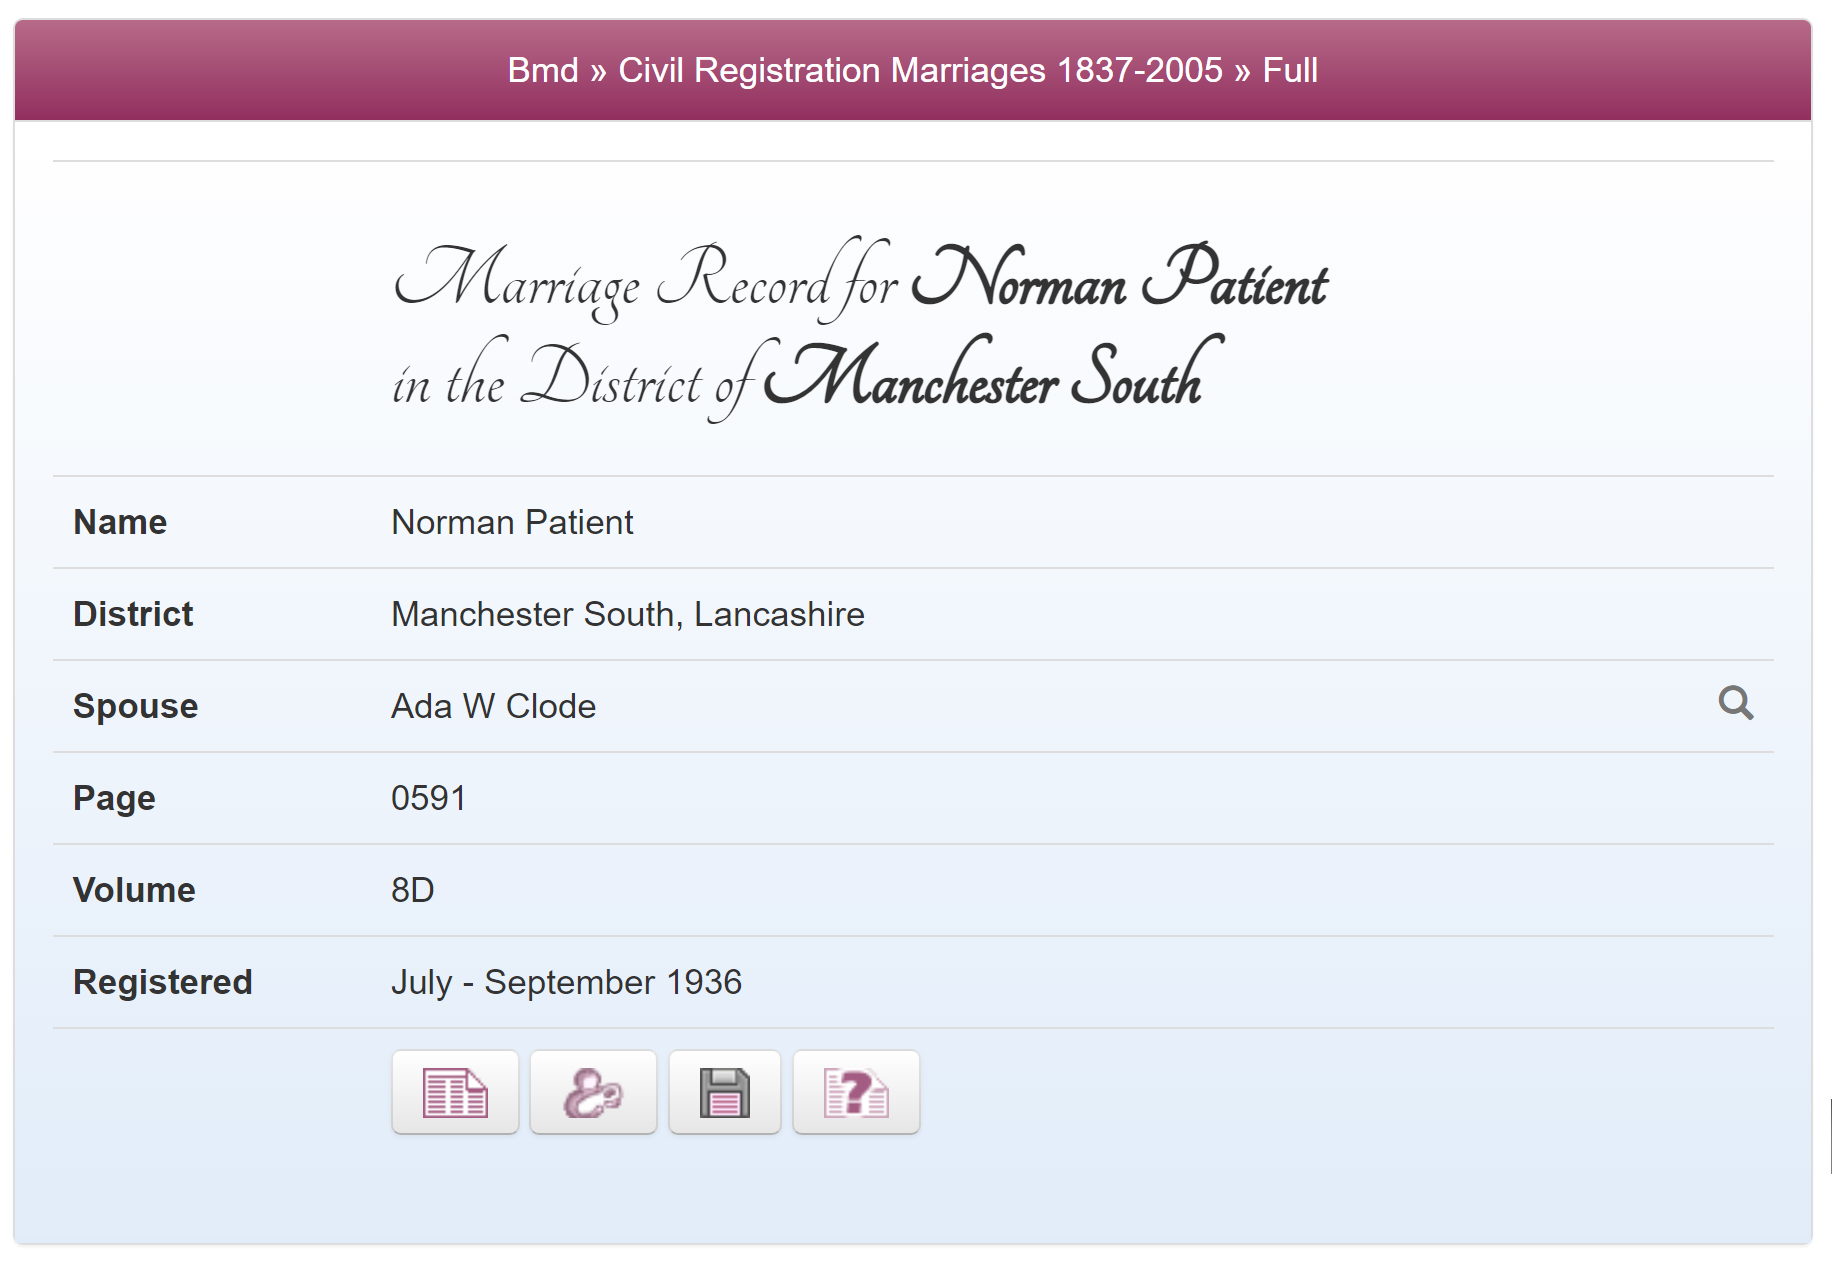 Norman and Ada's marriage record